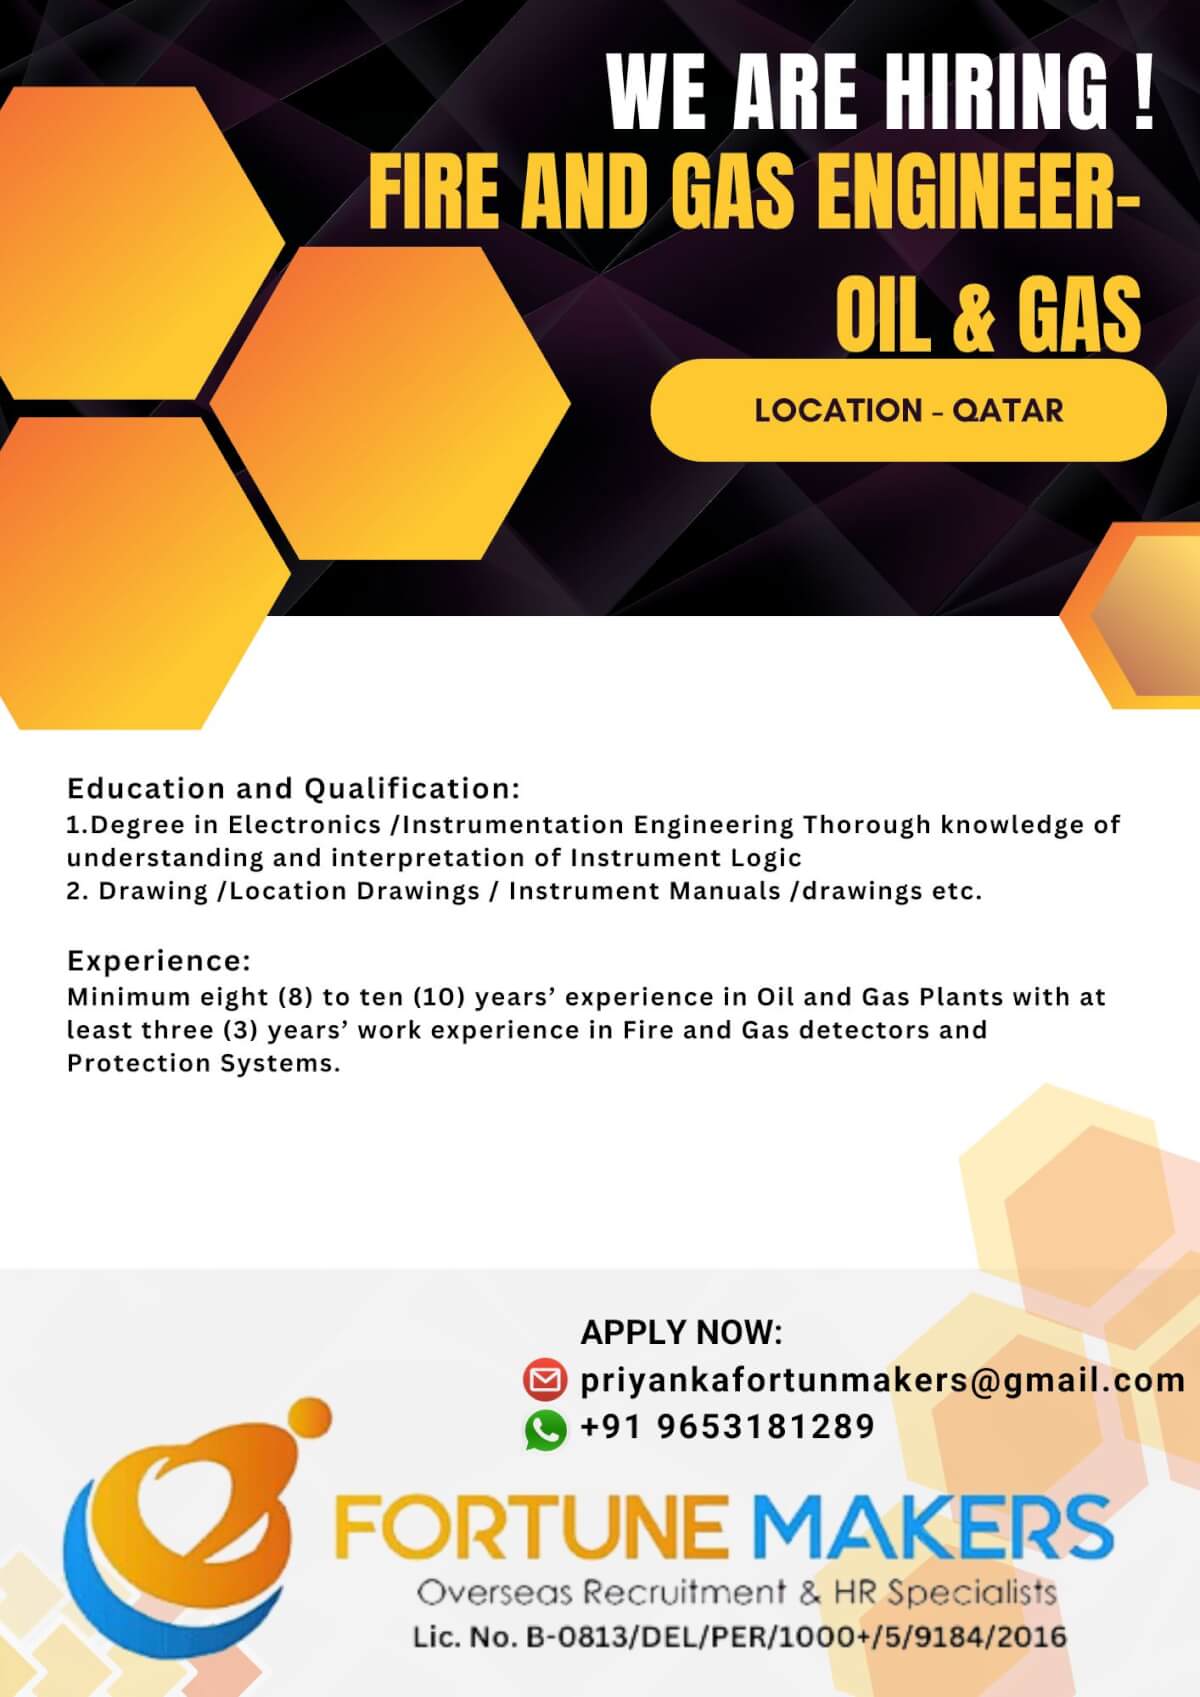 Fire and Gas Engineer- Oil & Gas